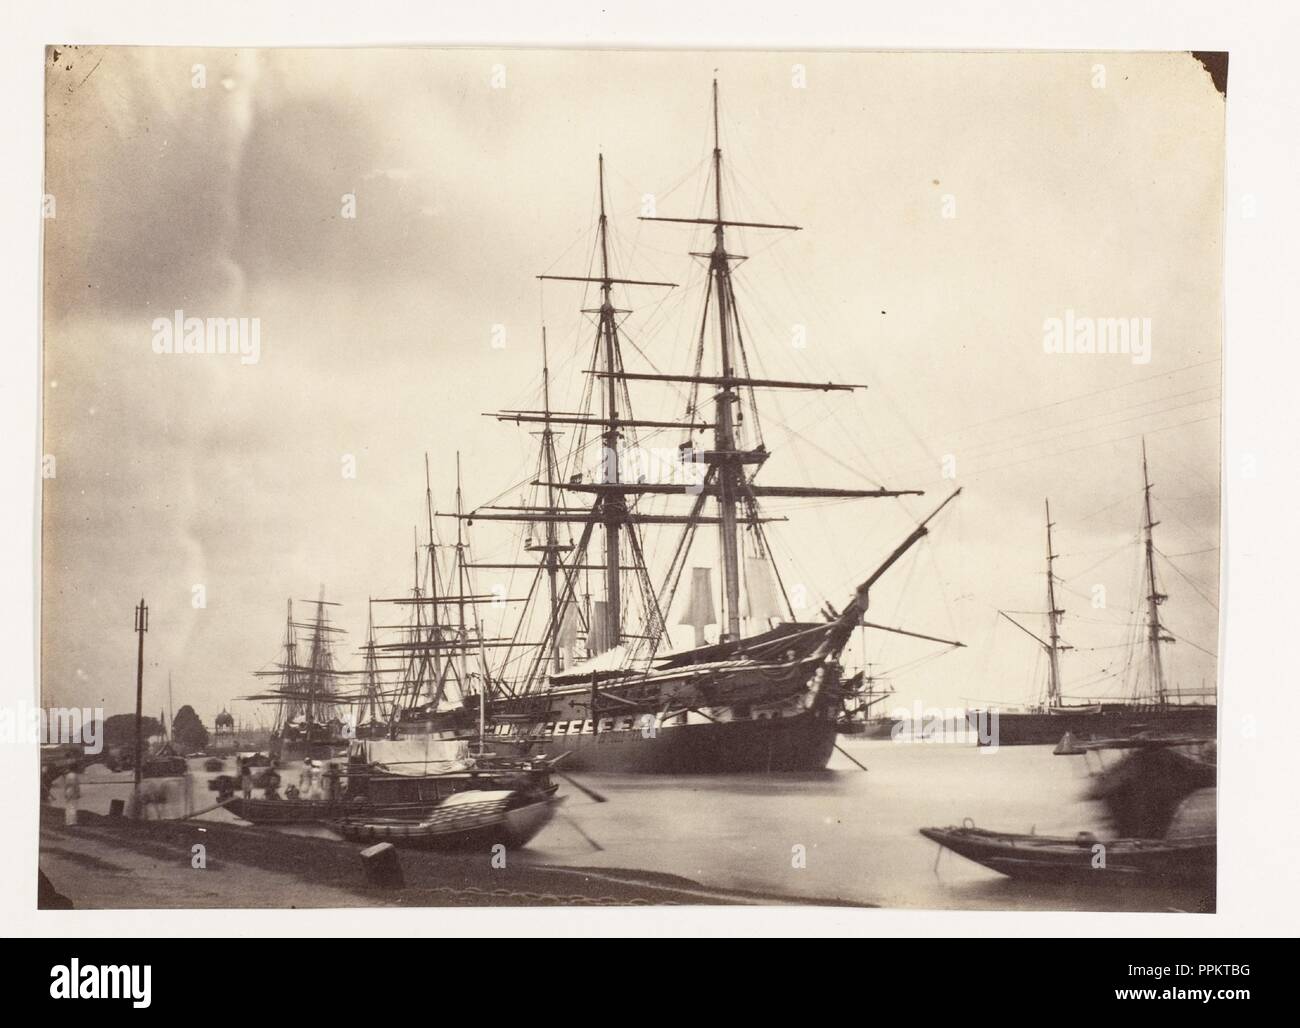 [H.M.S. Shannon off Calcutta]. Artist: Unknown. Dimensions: Image: 16 x 21.8 cm (6 5/16 x 8 9/16 in.)  Mount: 33.1 x 26.2 cm (13 1/16 x 10 5/16 in.)  Print mounted vertically. Date: 1858-61. Museum: Metropolitan Museum of Art, New York, USA. Stock Photo